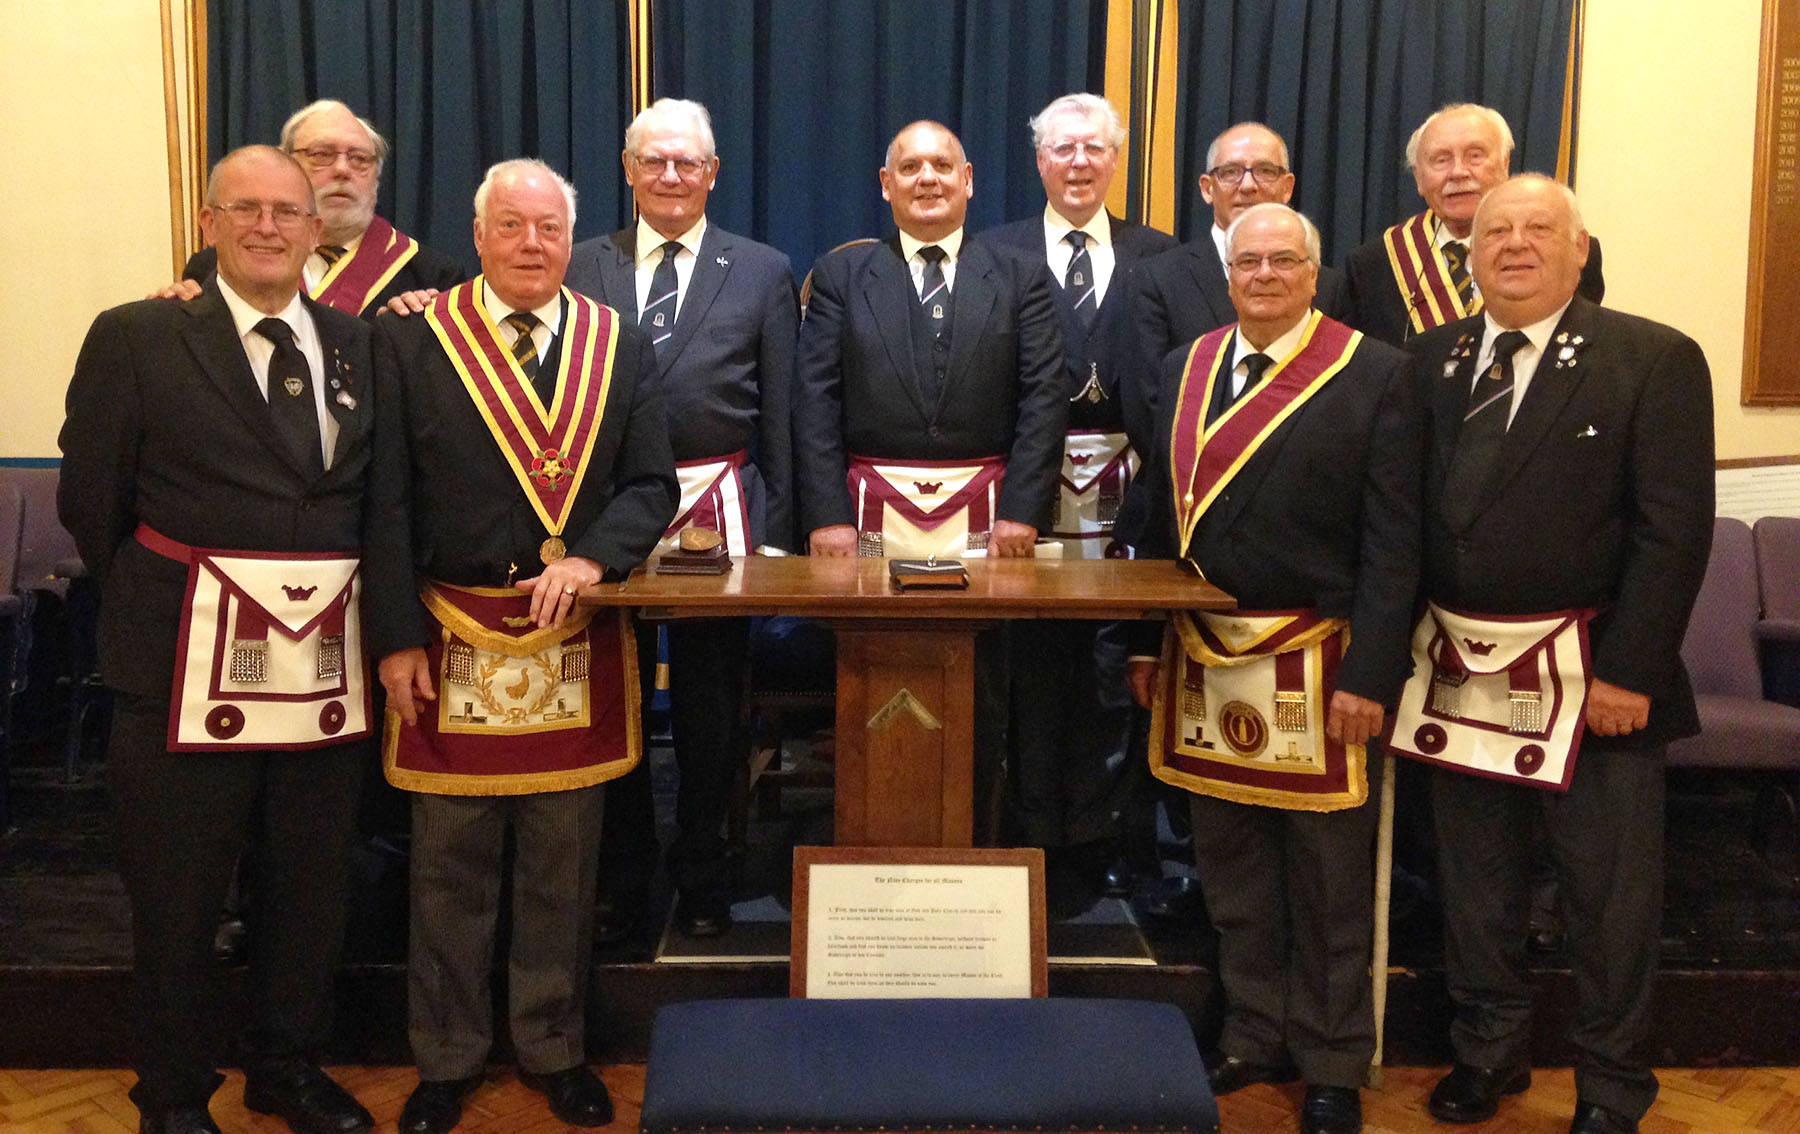 Court of Aelle No 25 - Installation Meeting and annual visit by the Provincial Grand Master